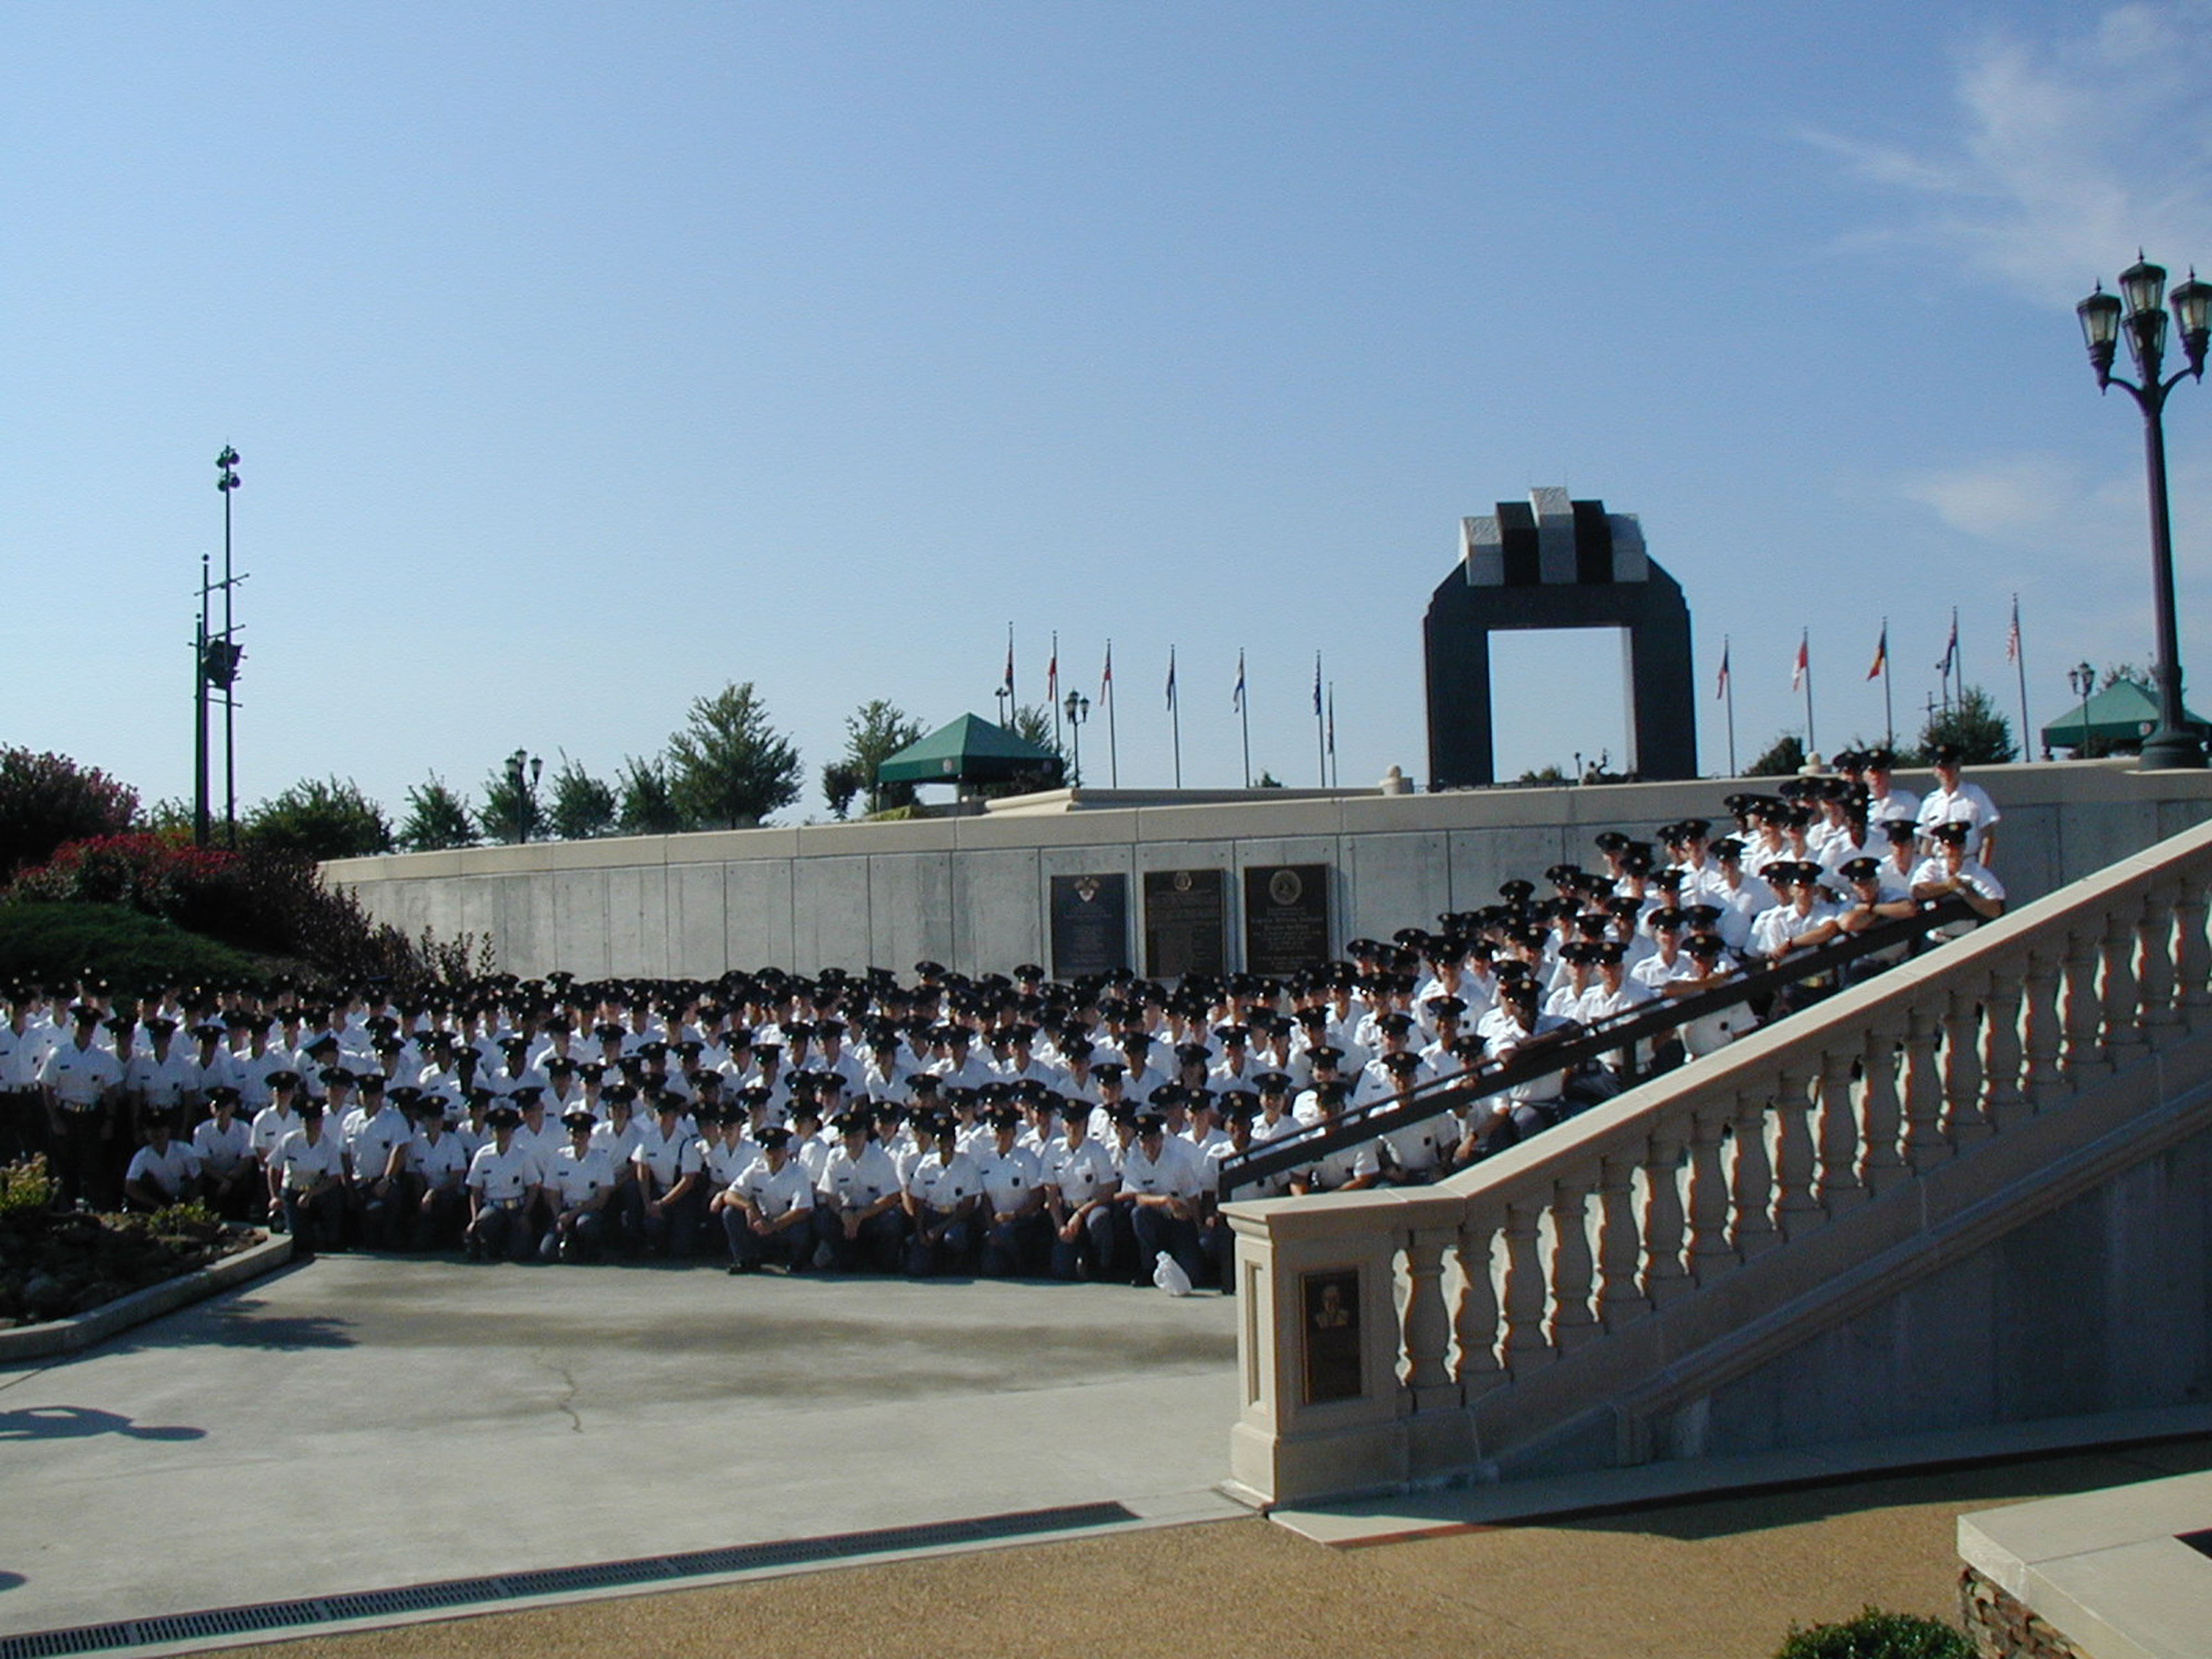 Virginia Tech Corps of Cadets freshman class trip to National D-Day Memorial in 2009